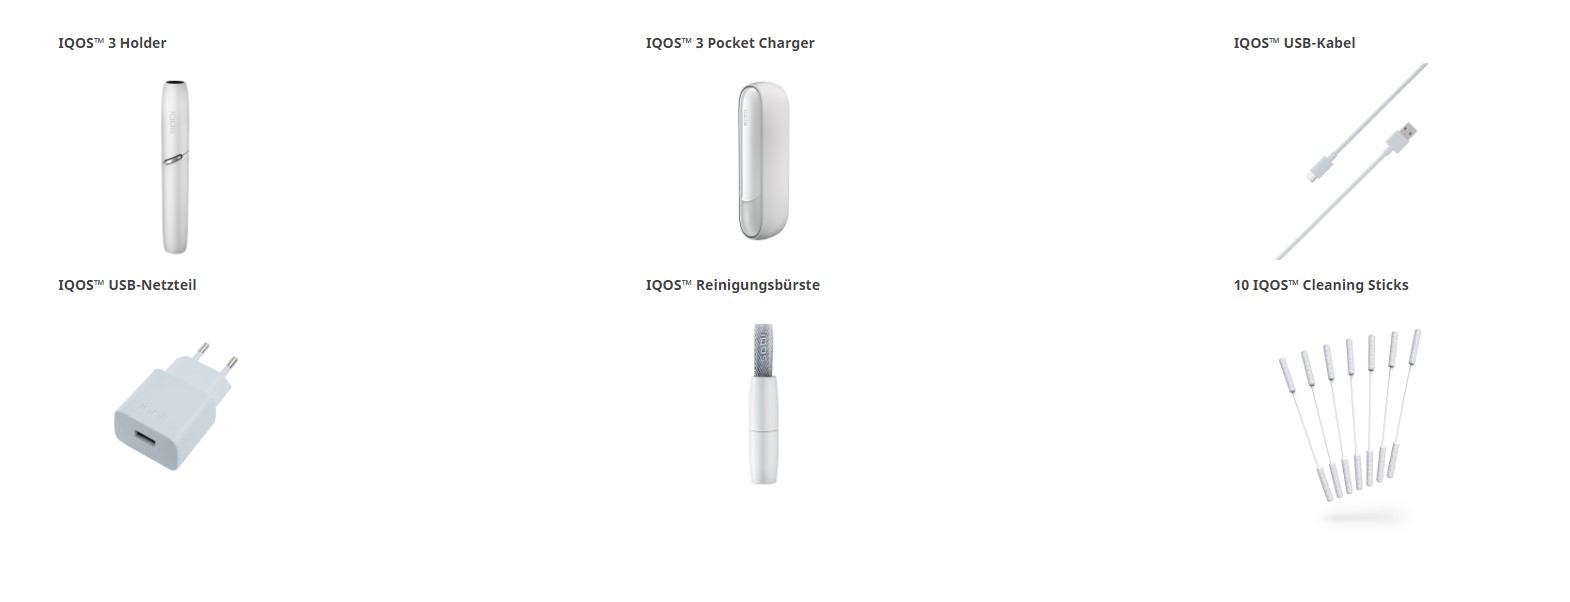 IQOS 3 Lieferumfang